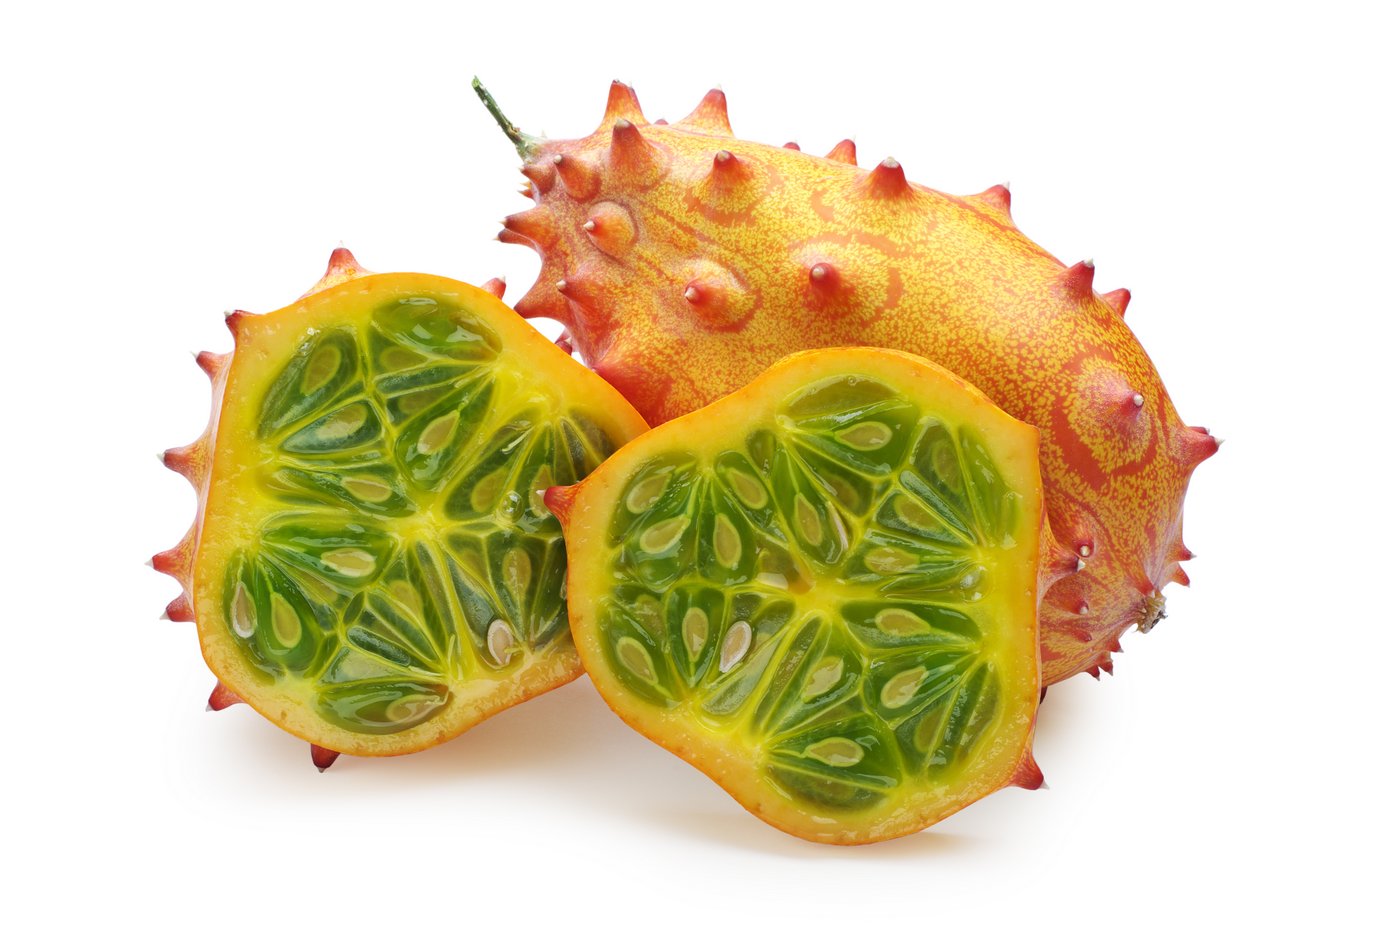 Horned Melon - African Cucumber - Kiwano - exotic fruit